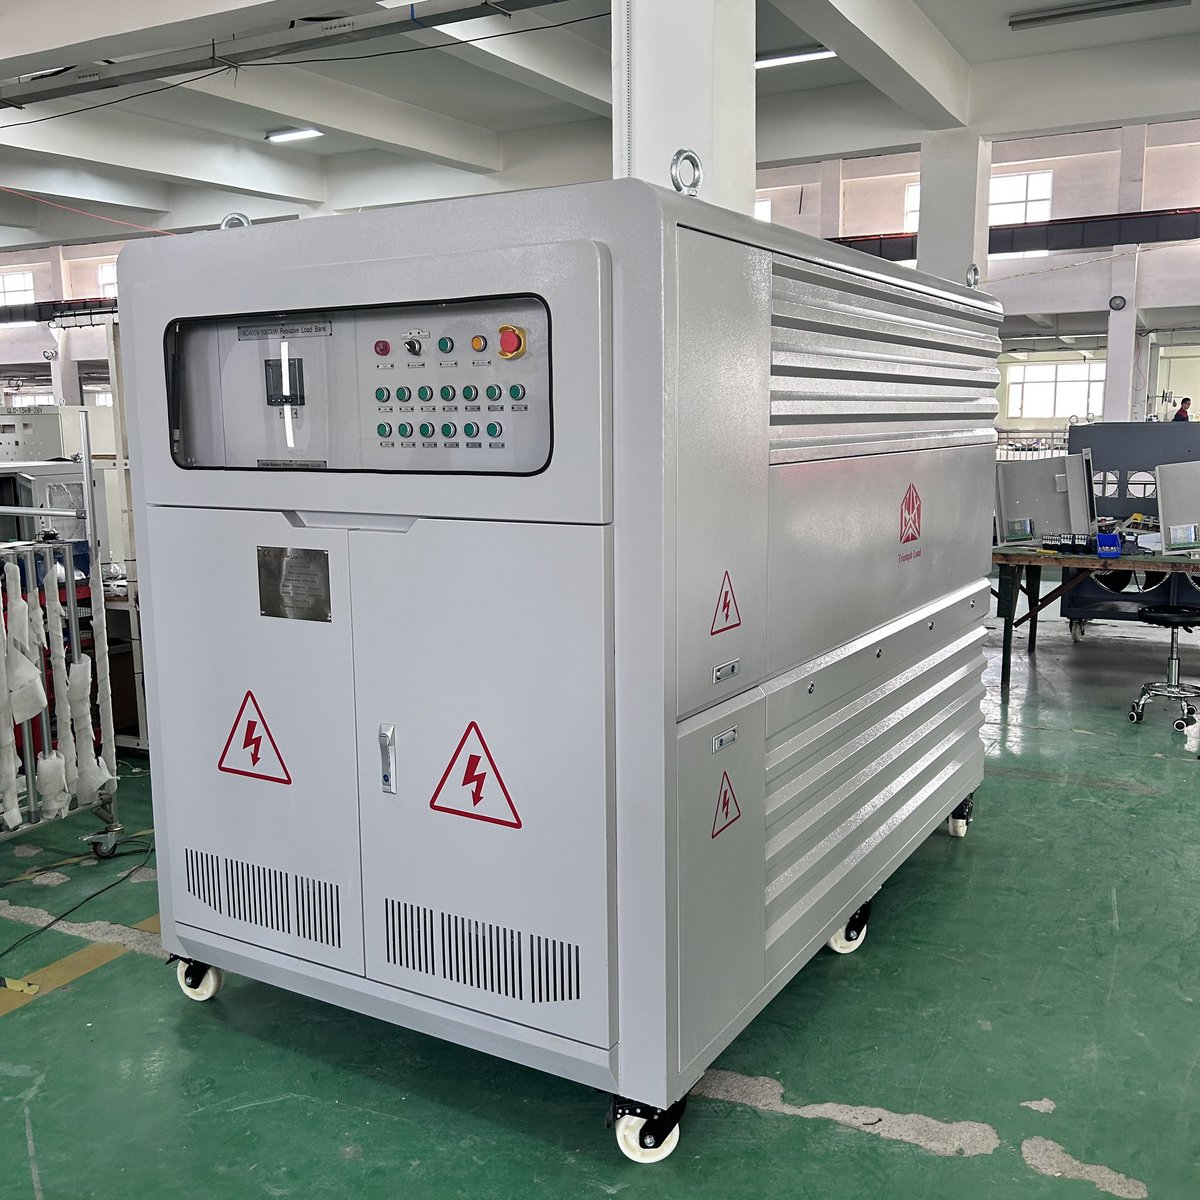 1000kw load bank indoor type 
#loadbank #generatorsettest #loadtesting 

Pm me if you are interested in it ☺️😊😍
WhatsApp :+86 19931102357